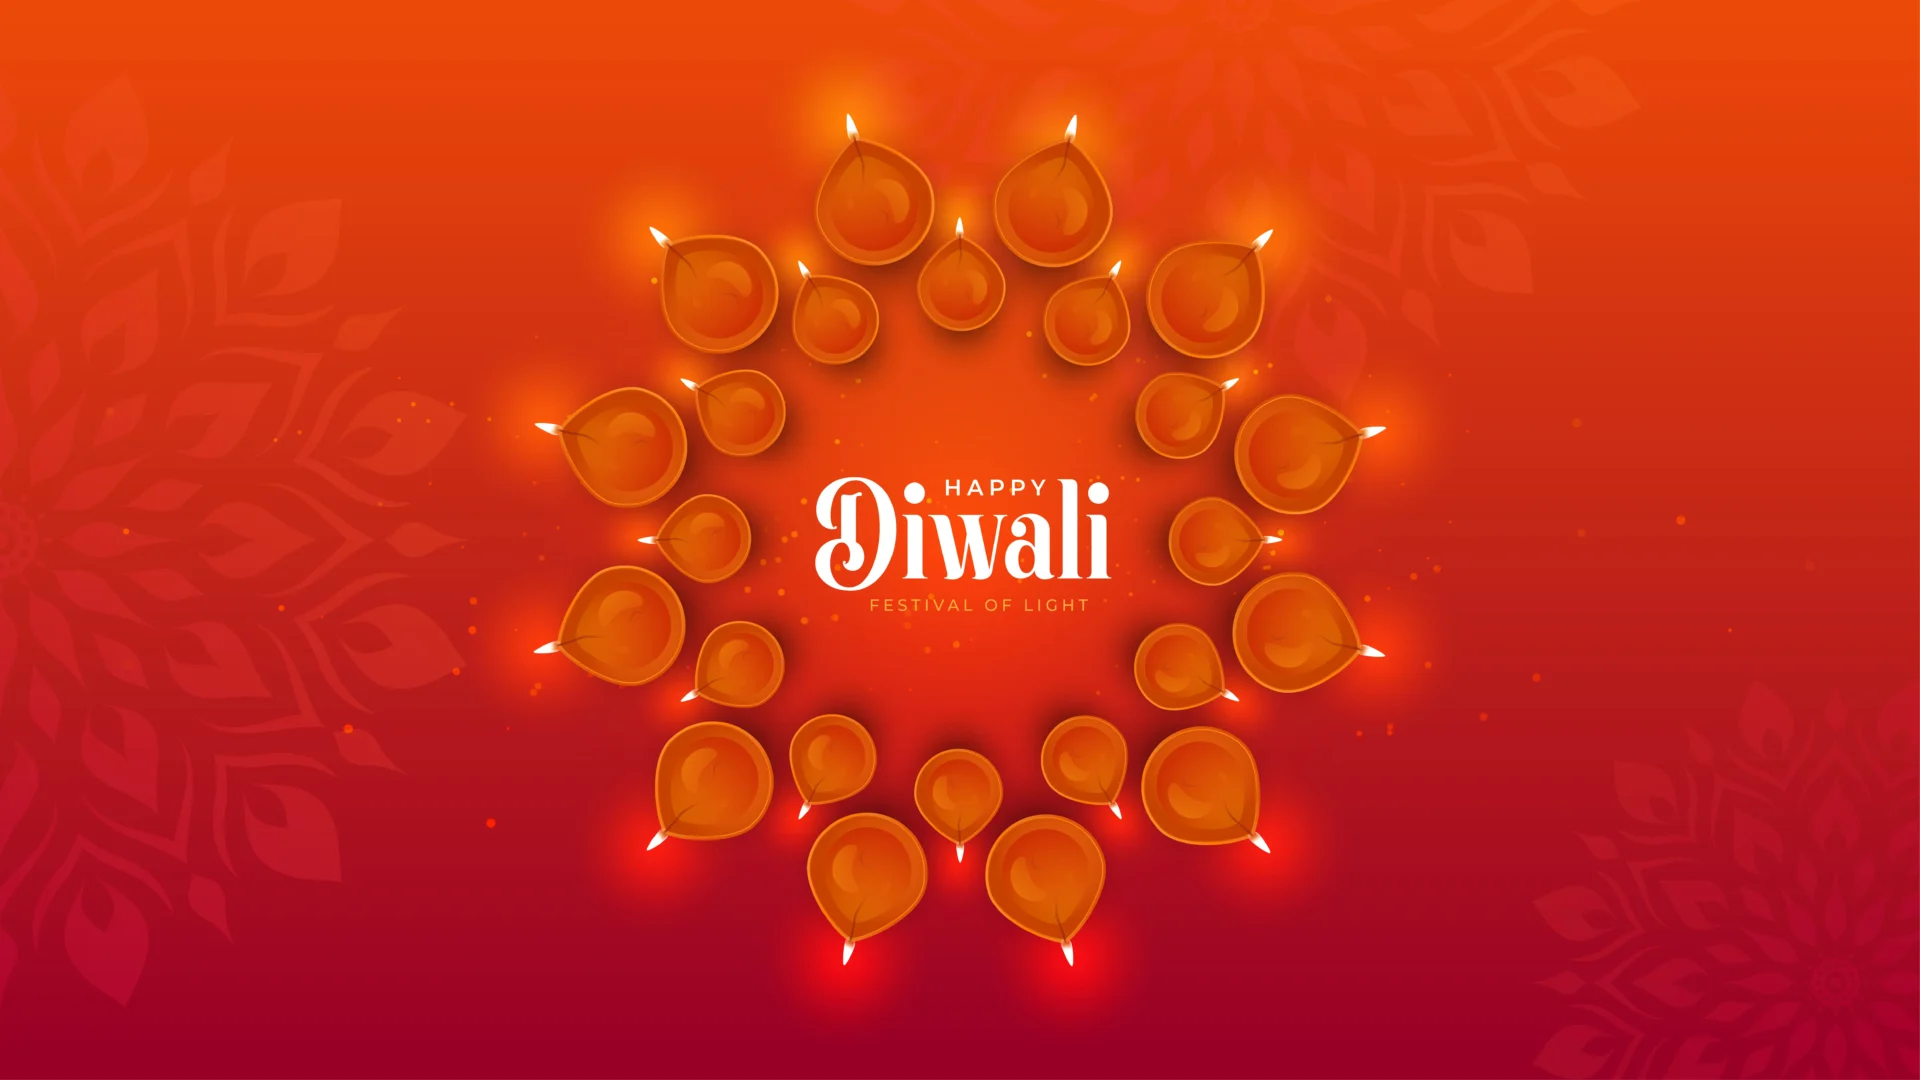 happy-diwali-festival-greeting-design-with-glowing-lamps-illustration